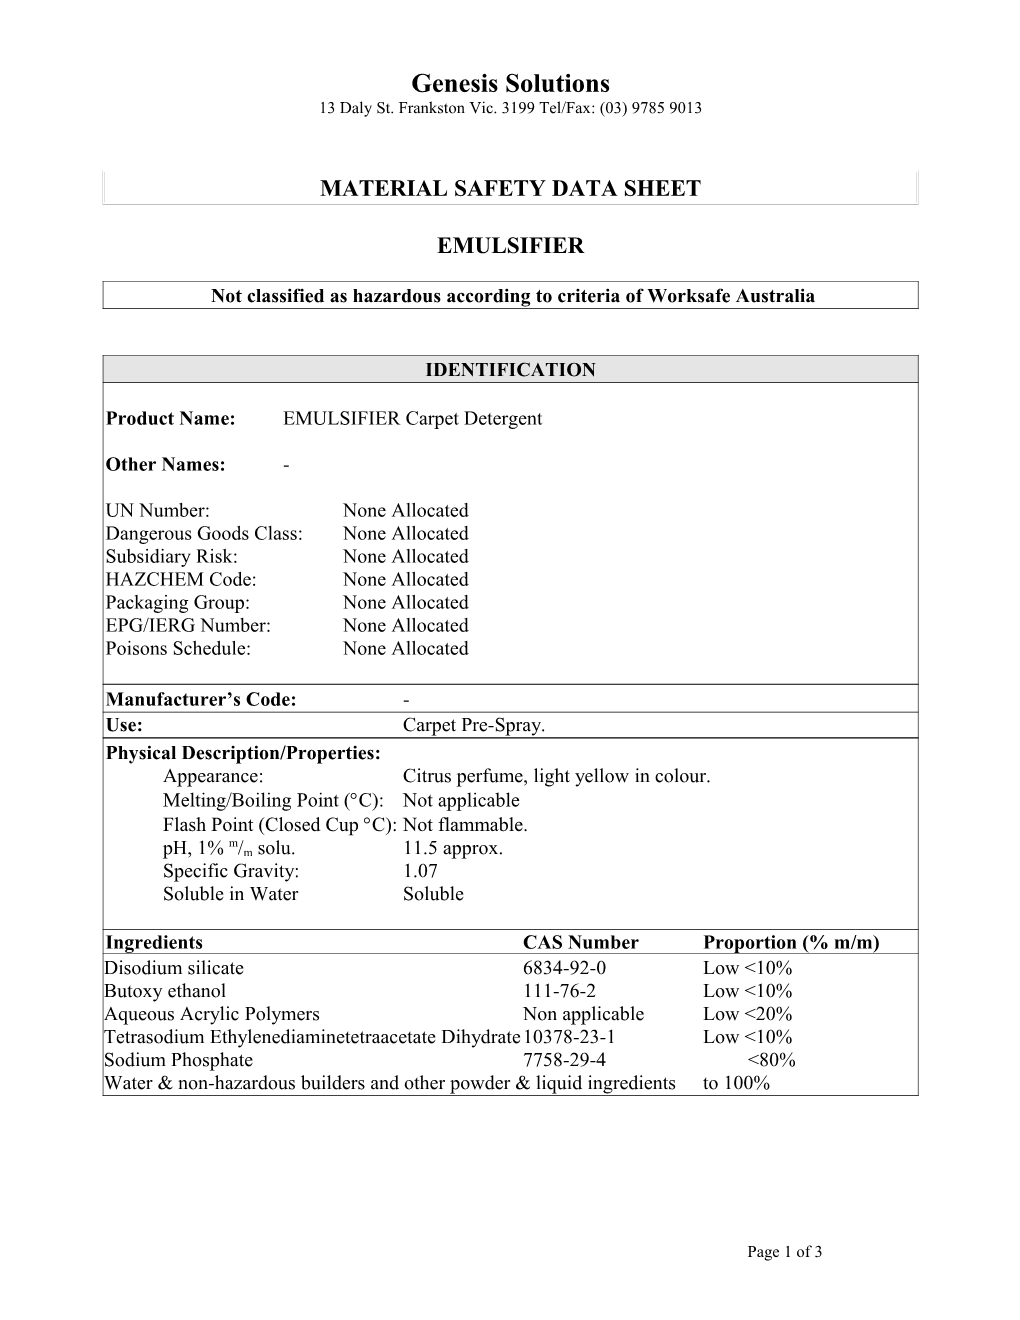 Material Safety Data Sheet s61